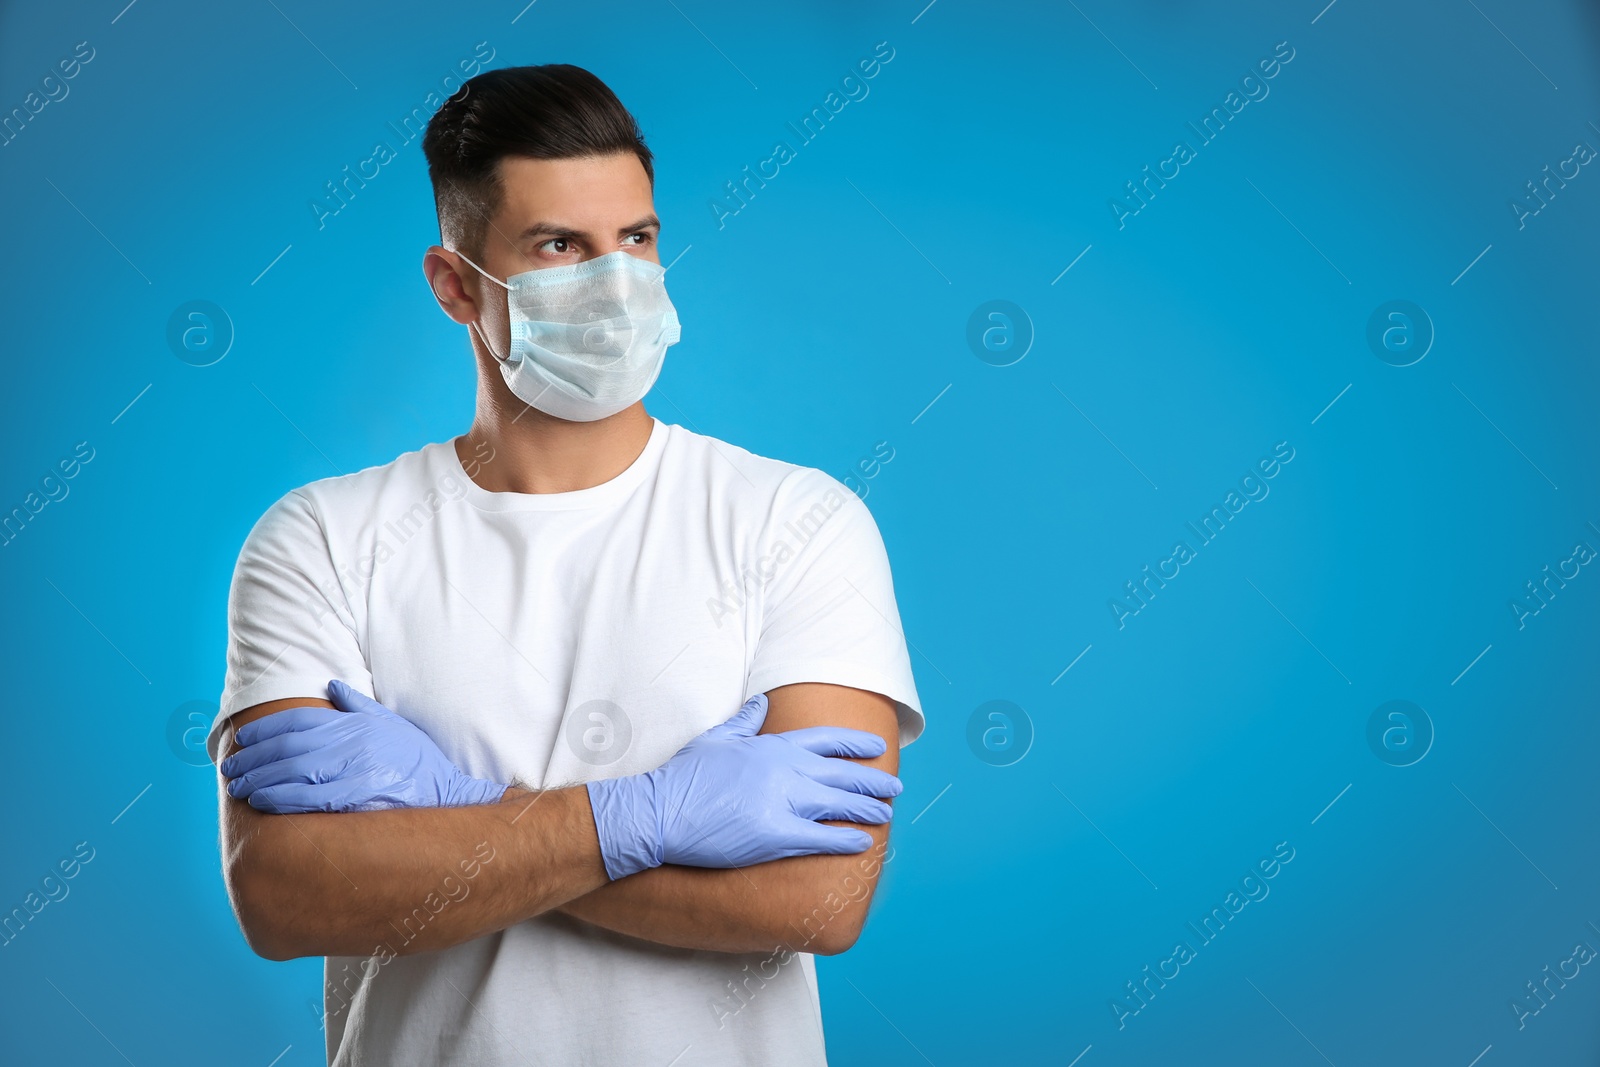 Photo of Man wearing protective face mask and medical gloves on blue background. Space for text